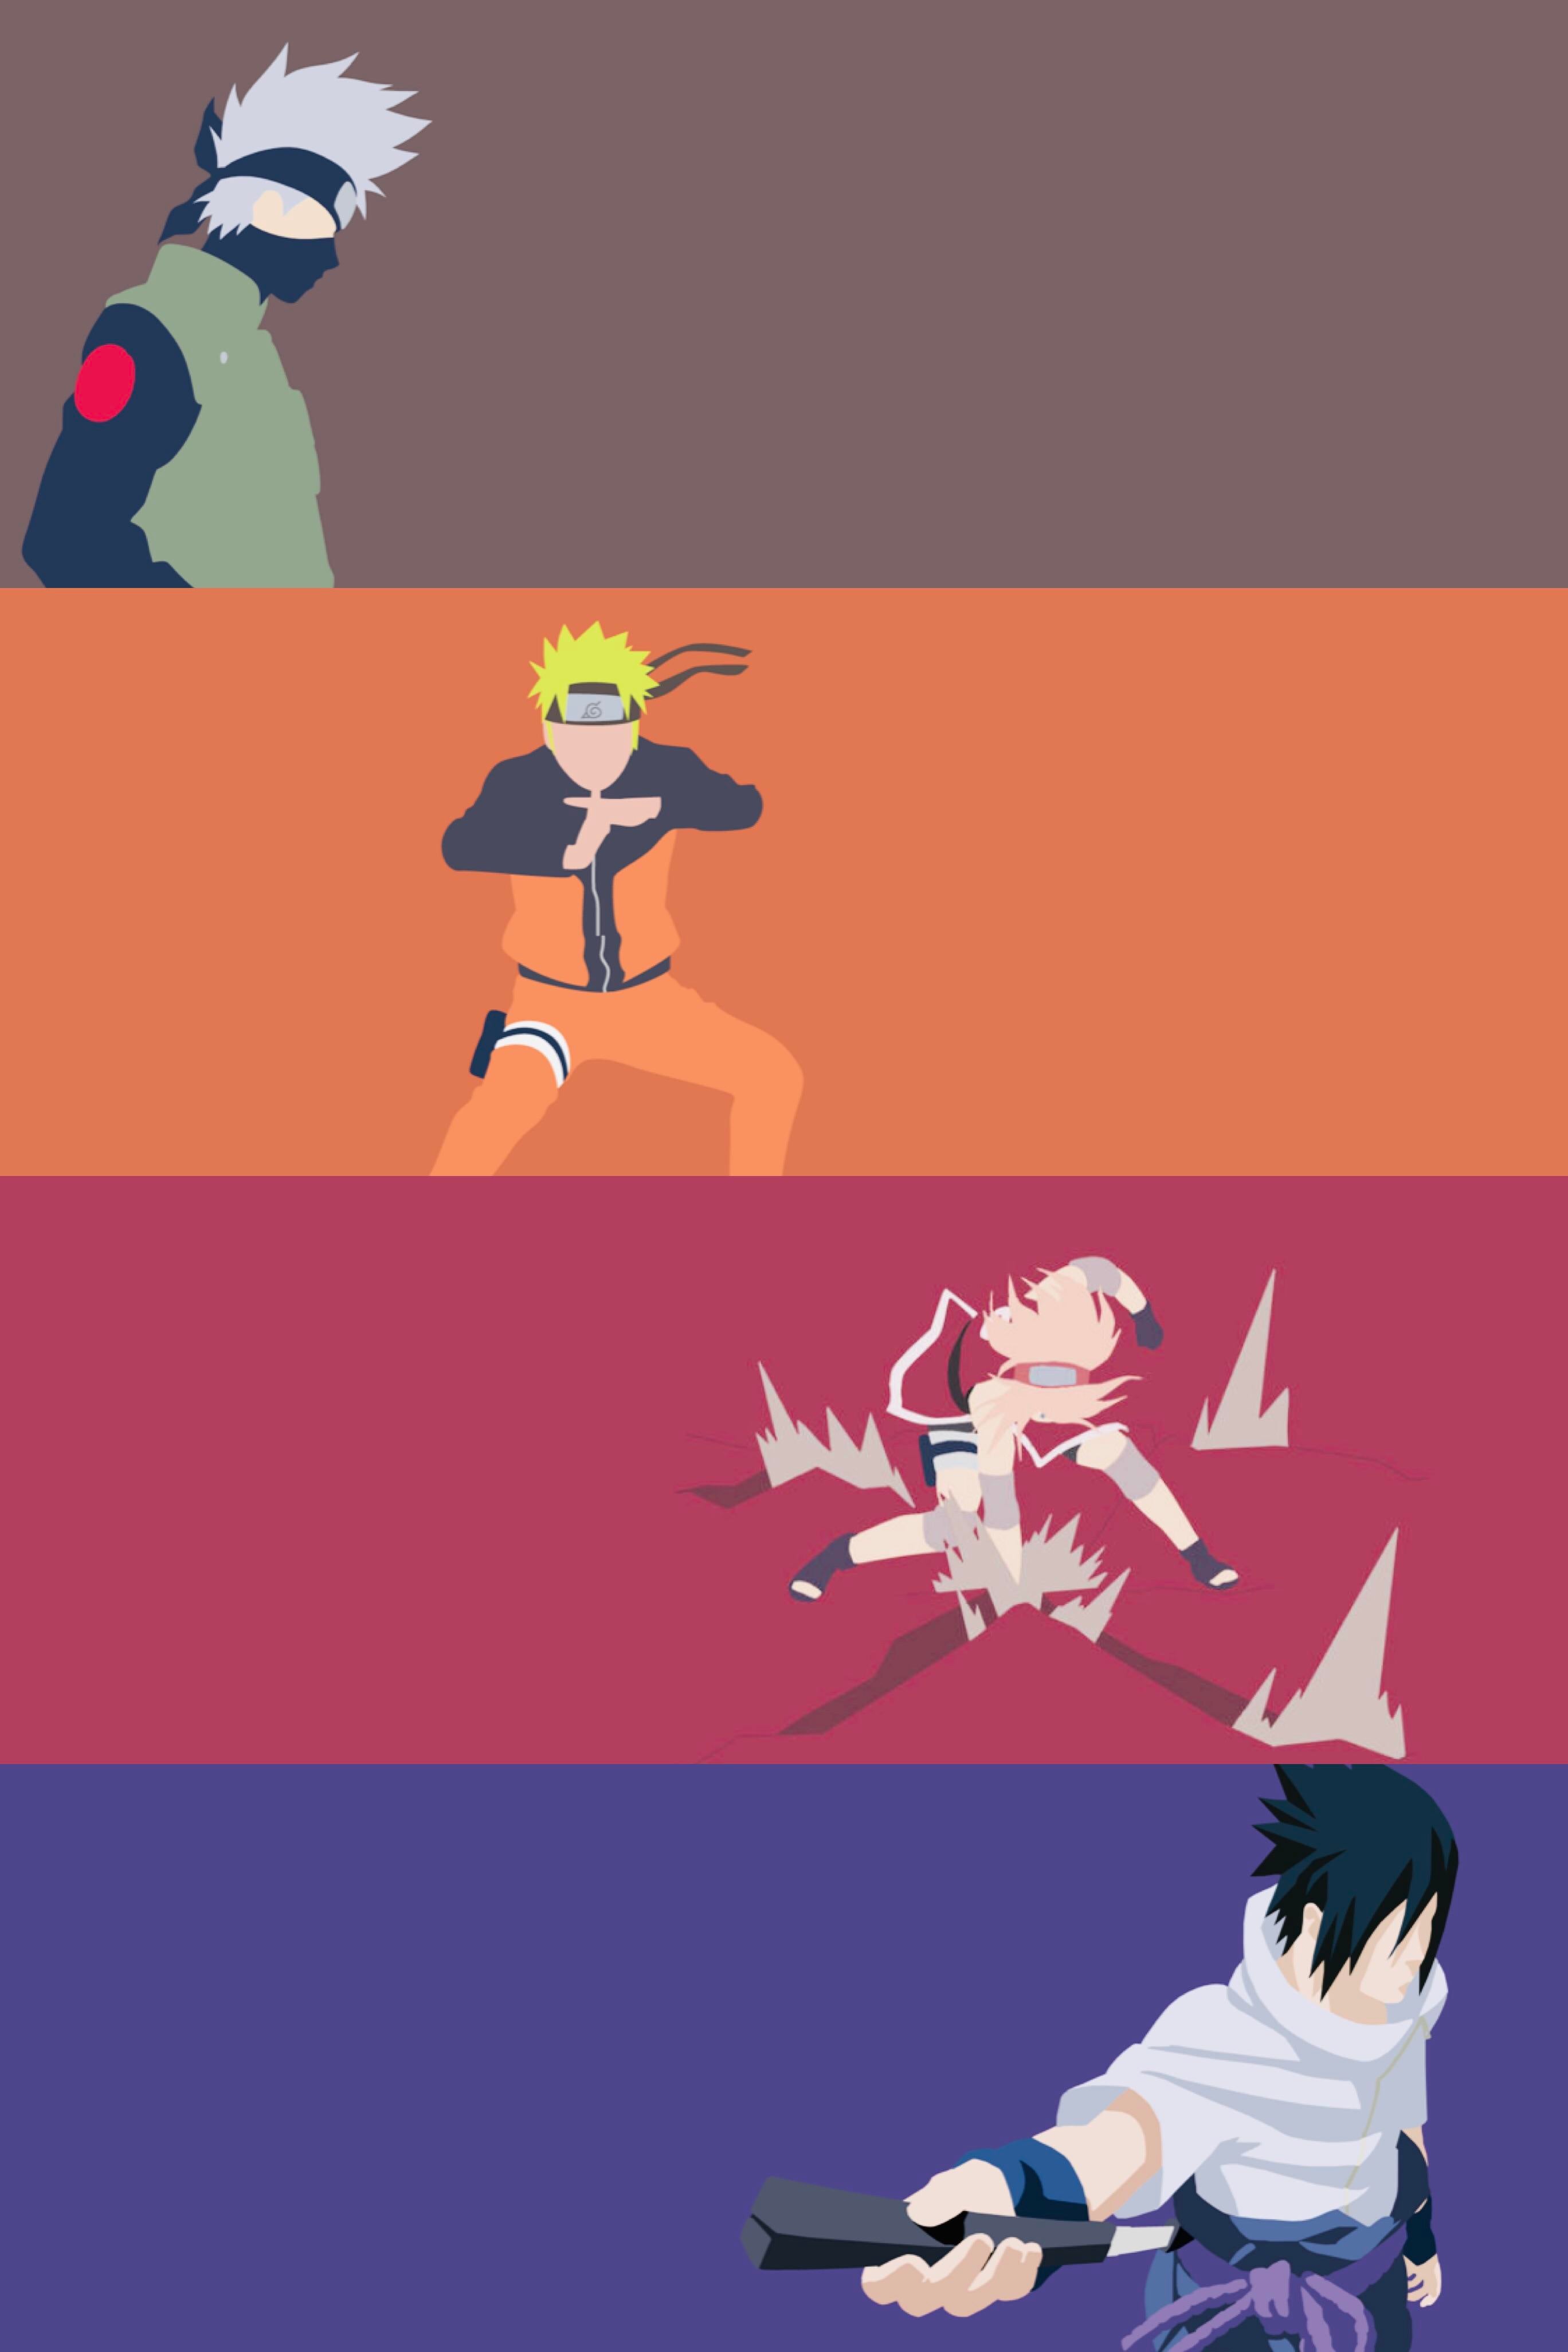 Put together a few screensavers online to make this one of Team 7!